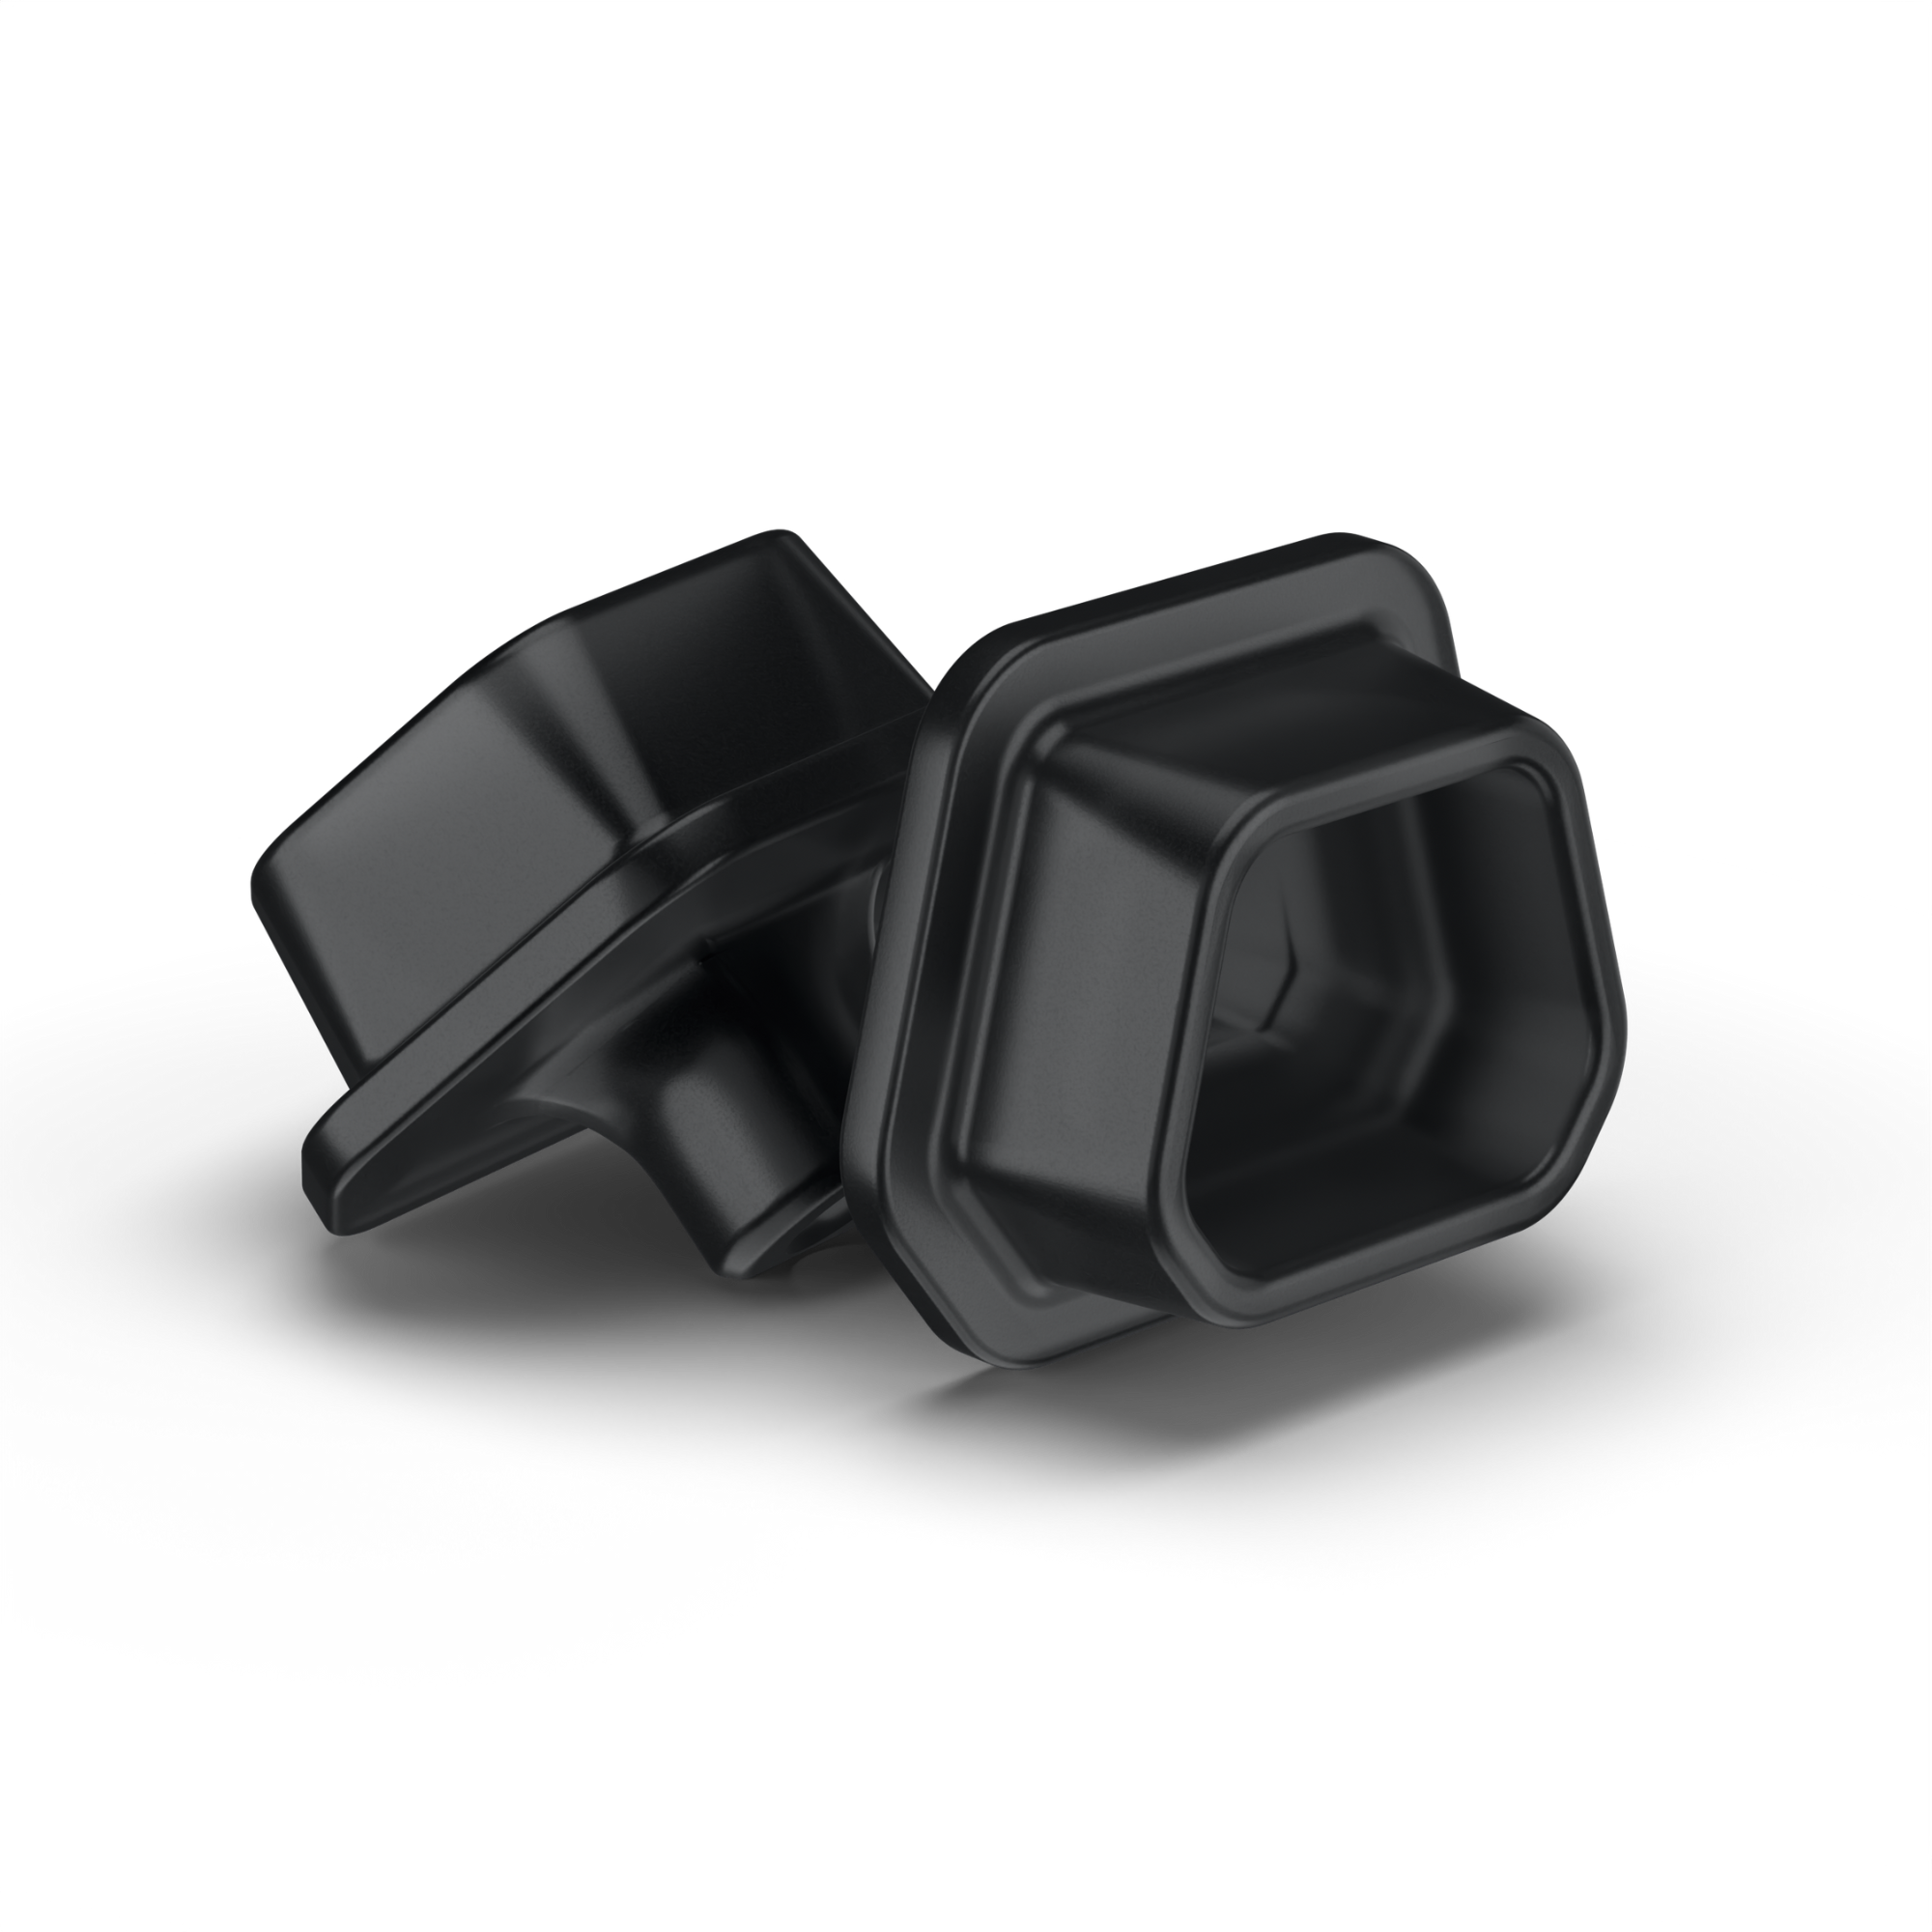 BACtrack C Series Breathalyzer Mouthpieces